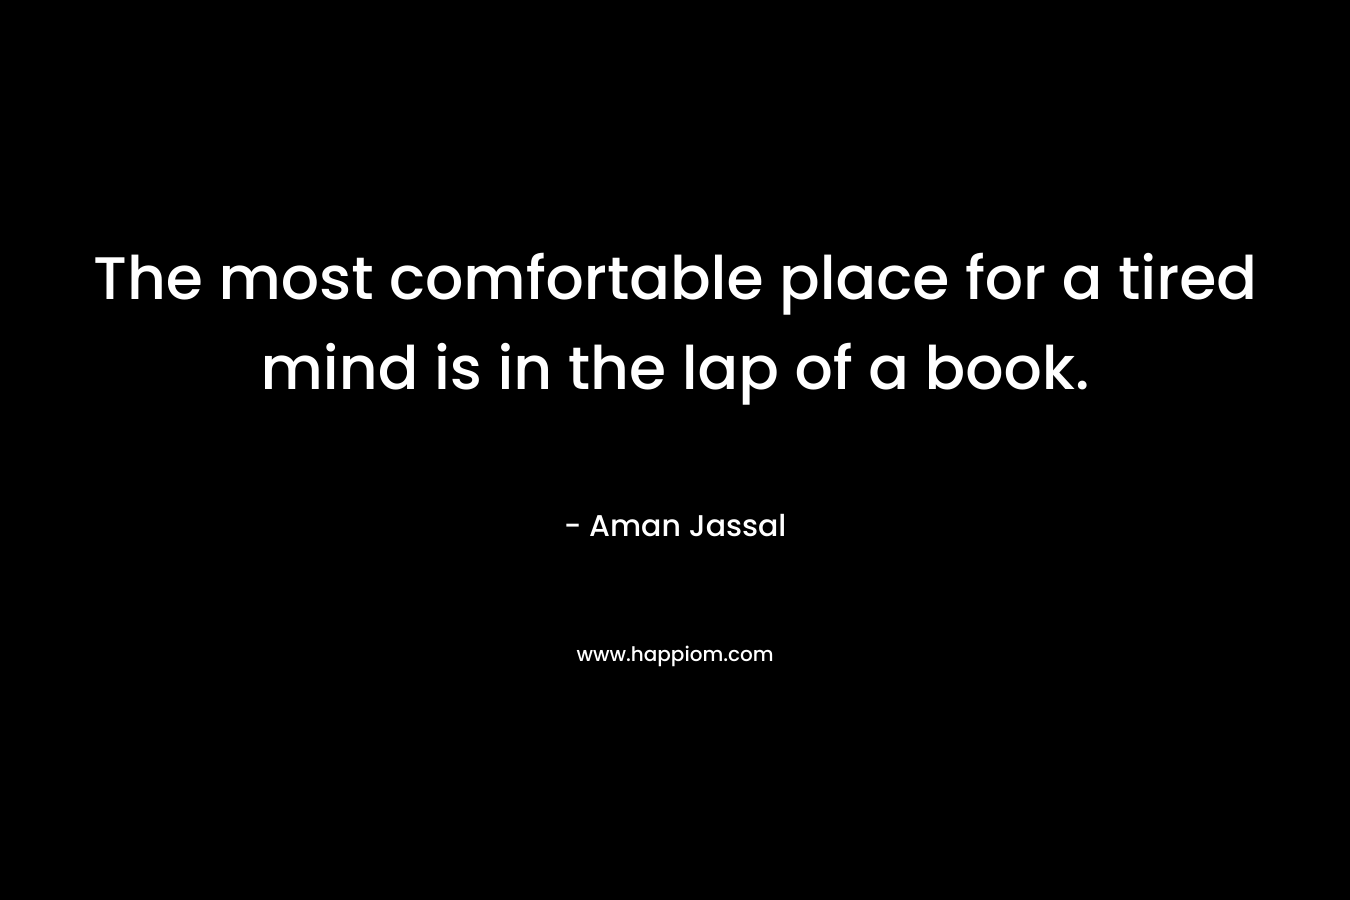 The most comfortable place for a tired mind is in the lap of a book.